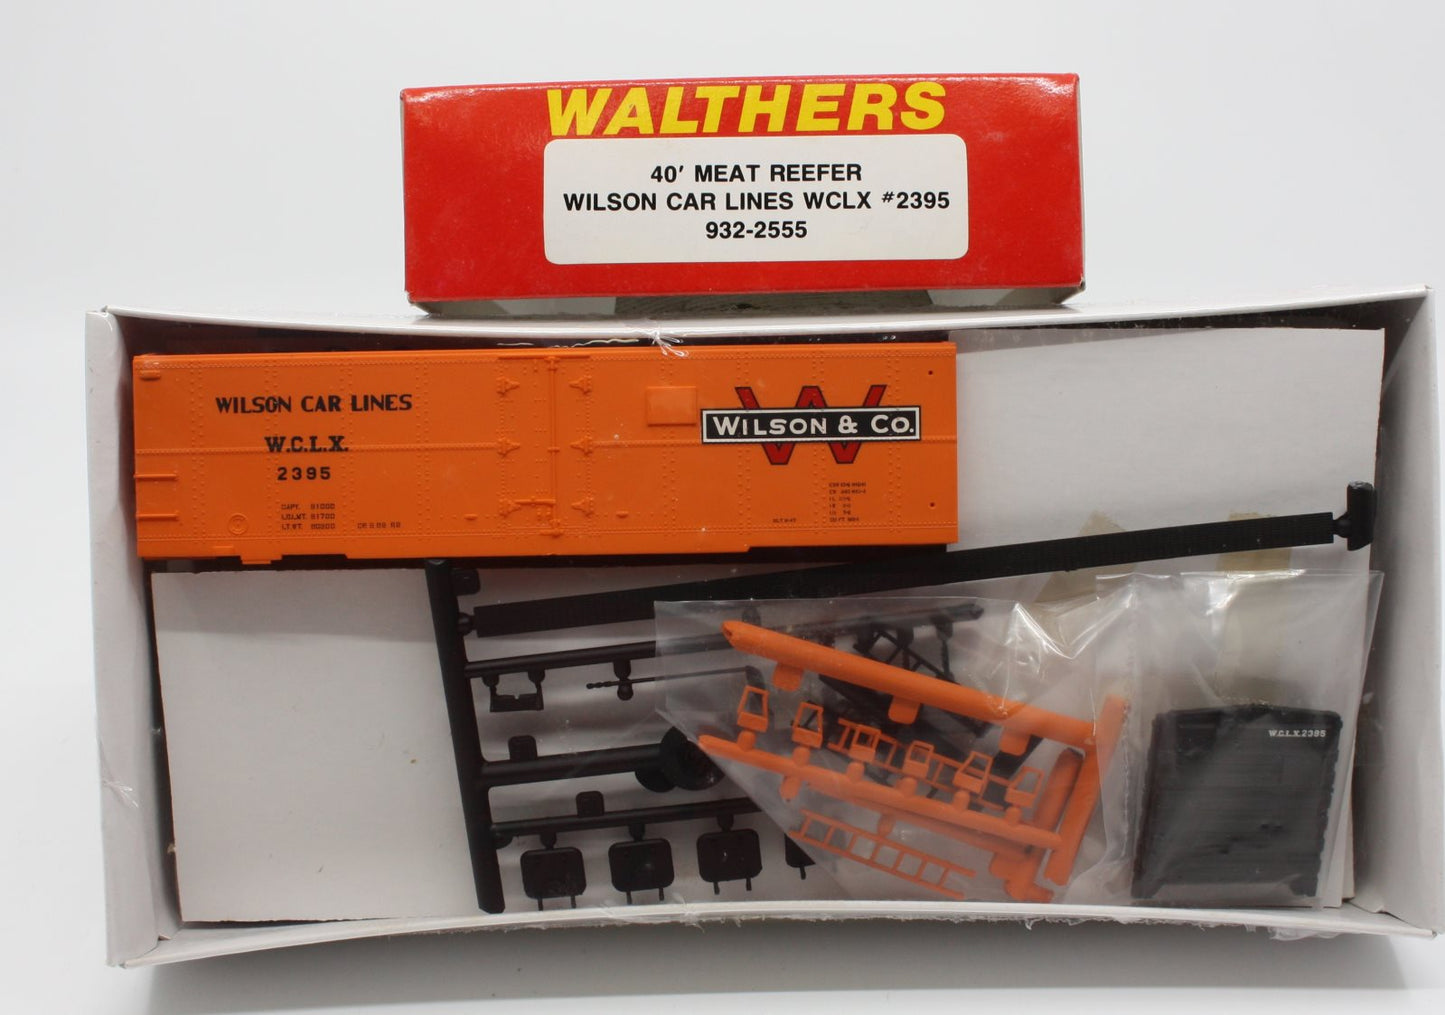 Walthers 932-2555 HO 40' Meat Reefer Wilson Car Lines WCLX